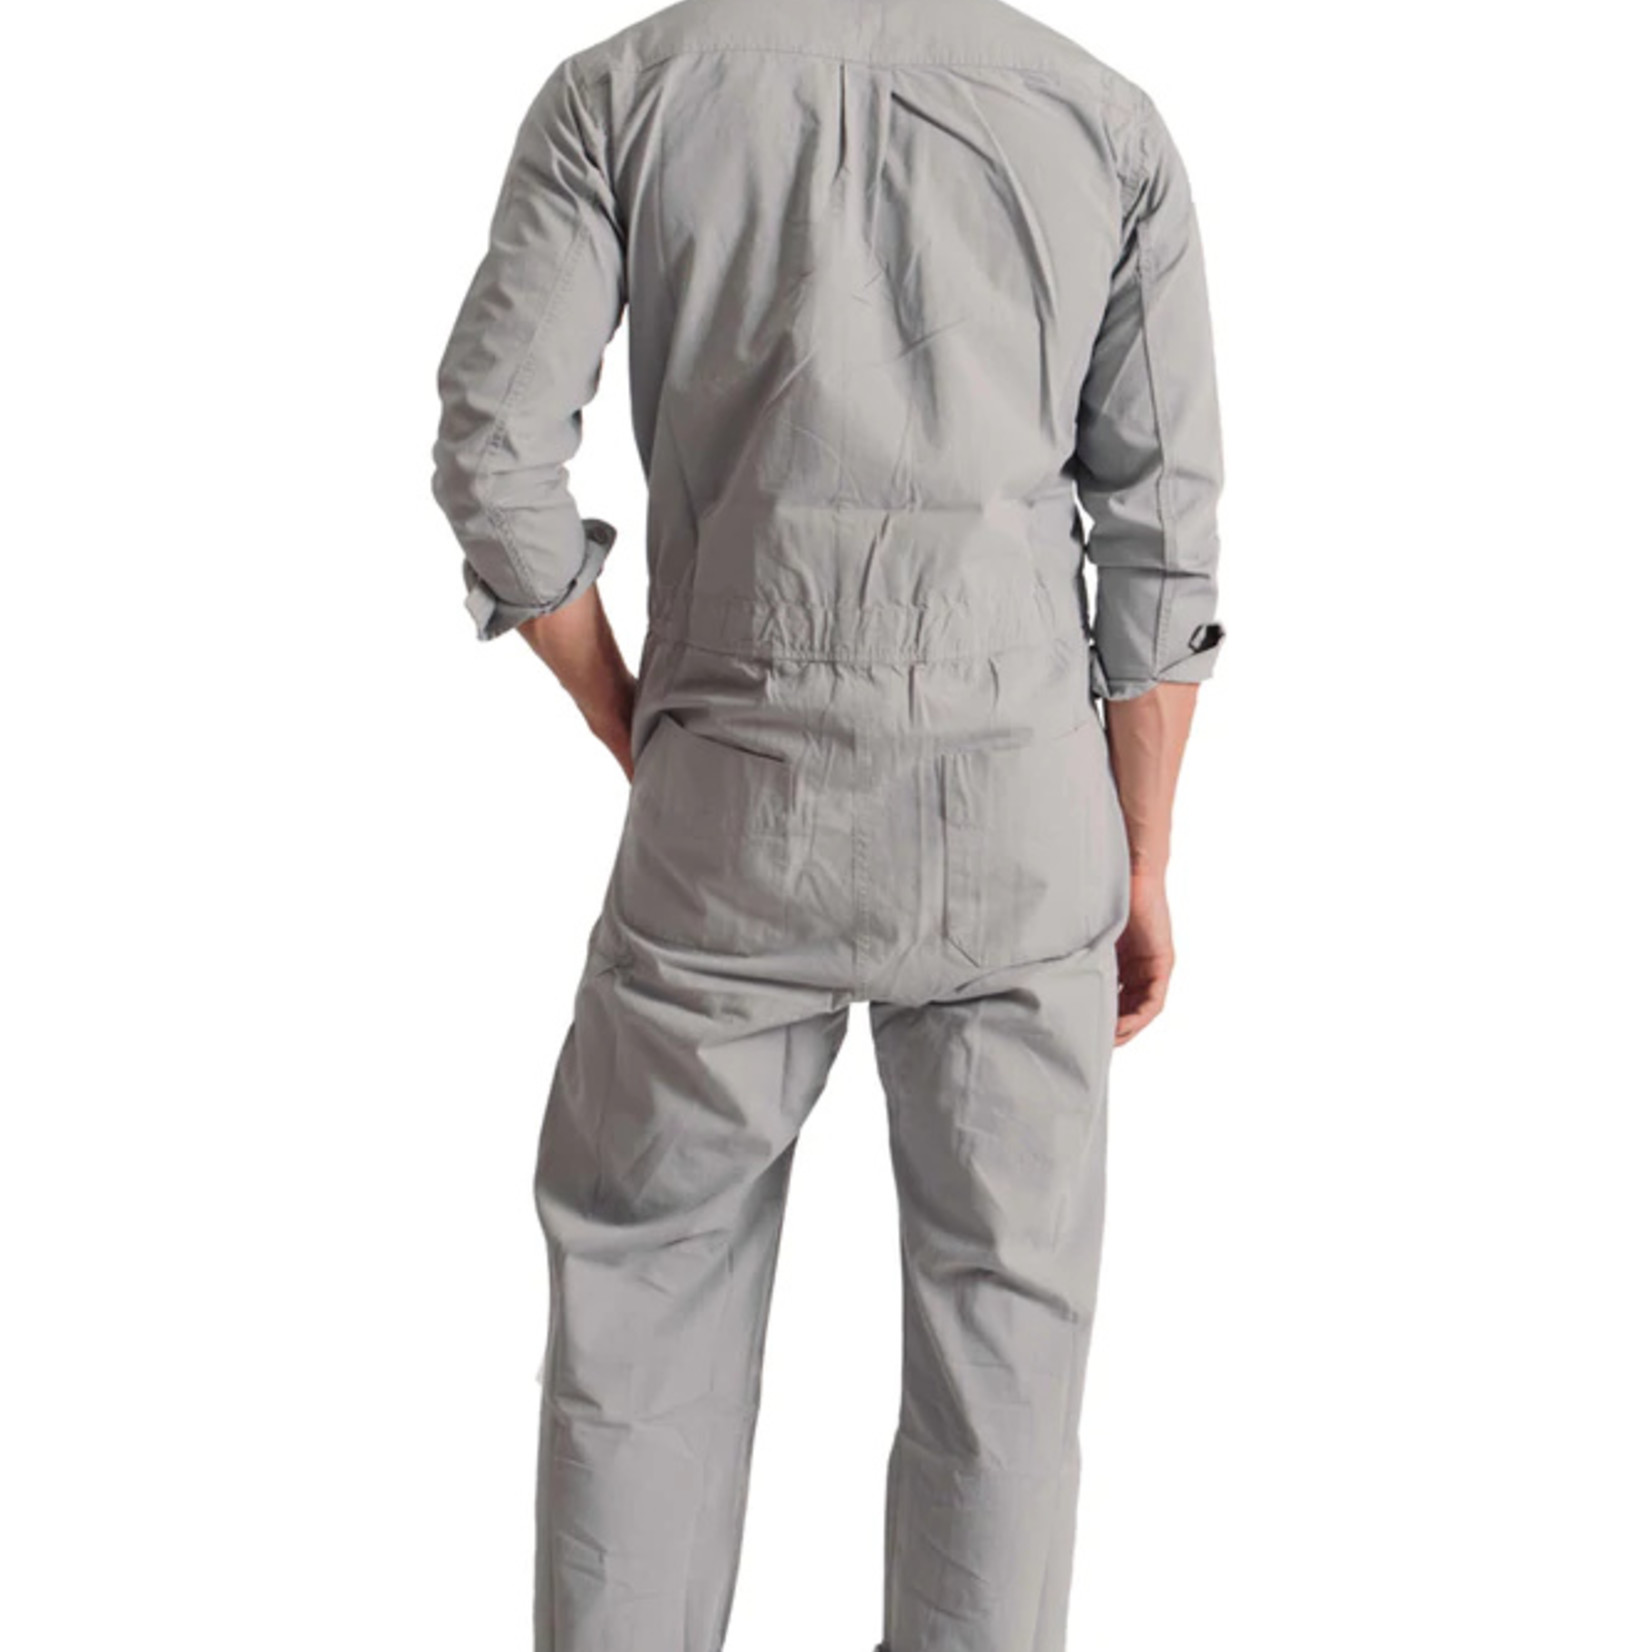 Westerlind Climbing Suit in Gray